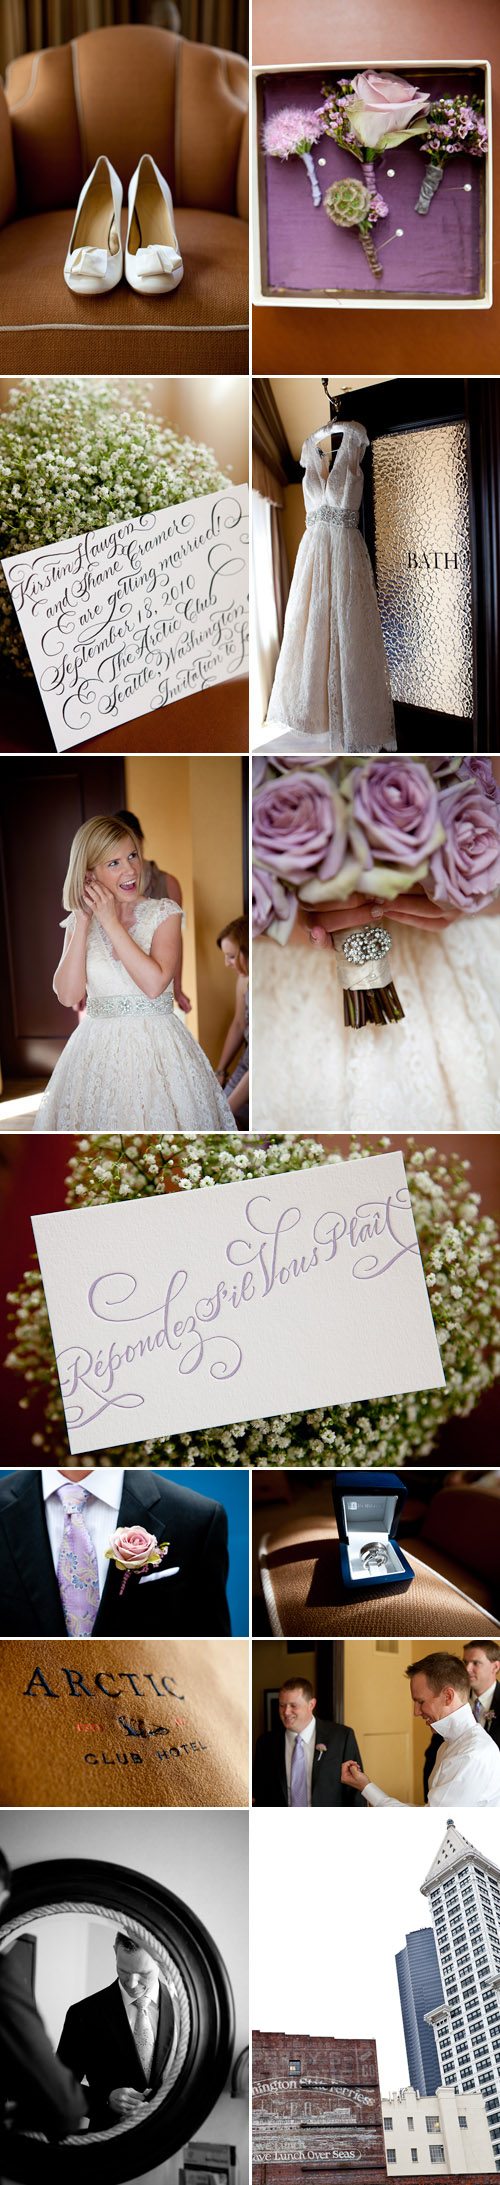 stylish seattle real wedding at the Arctic Club Hotel, photos by Kim and Adam Bamberg of La Vie Photography